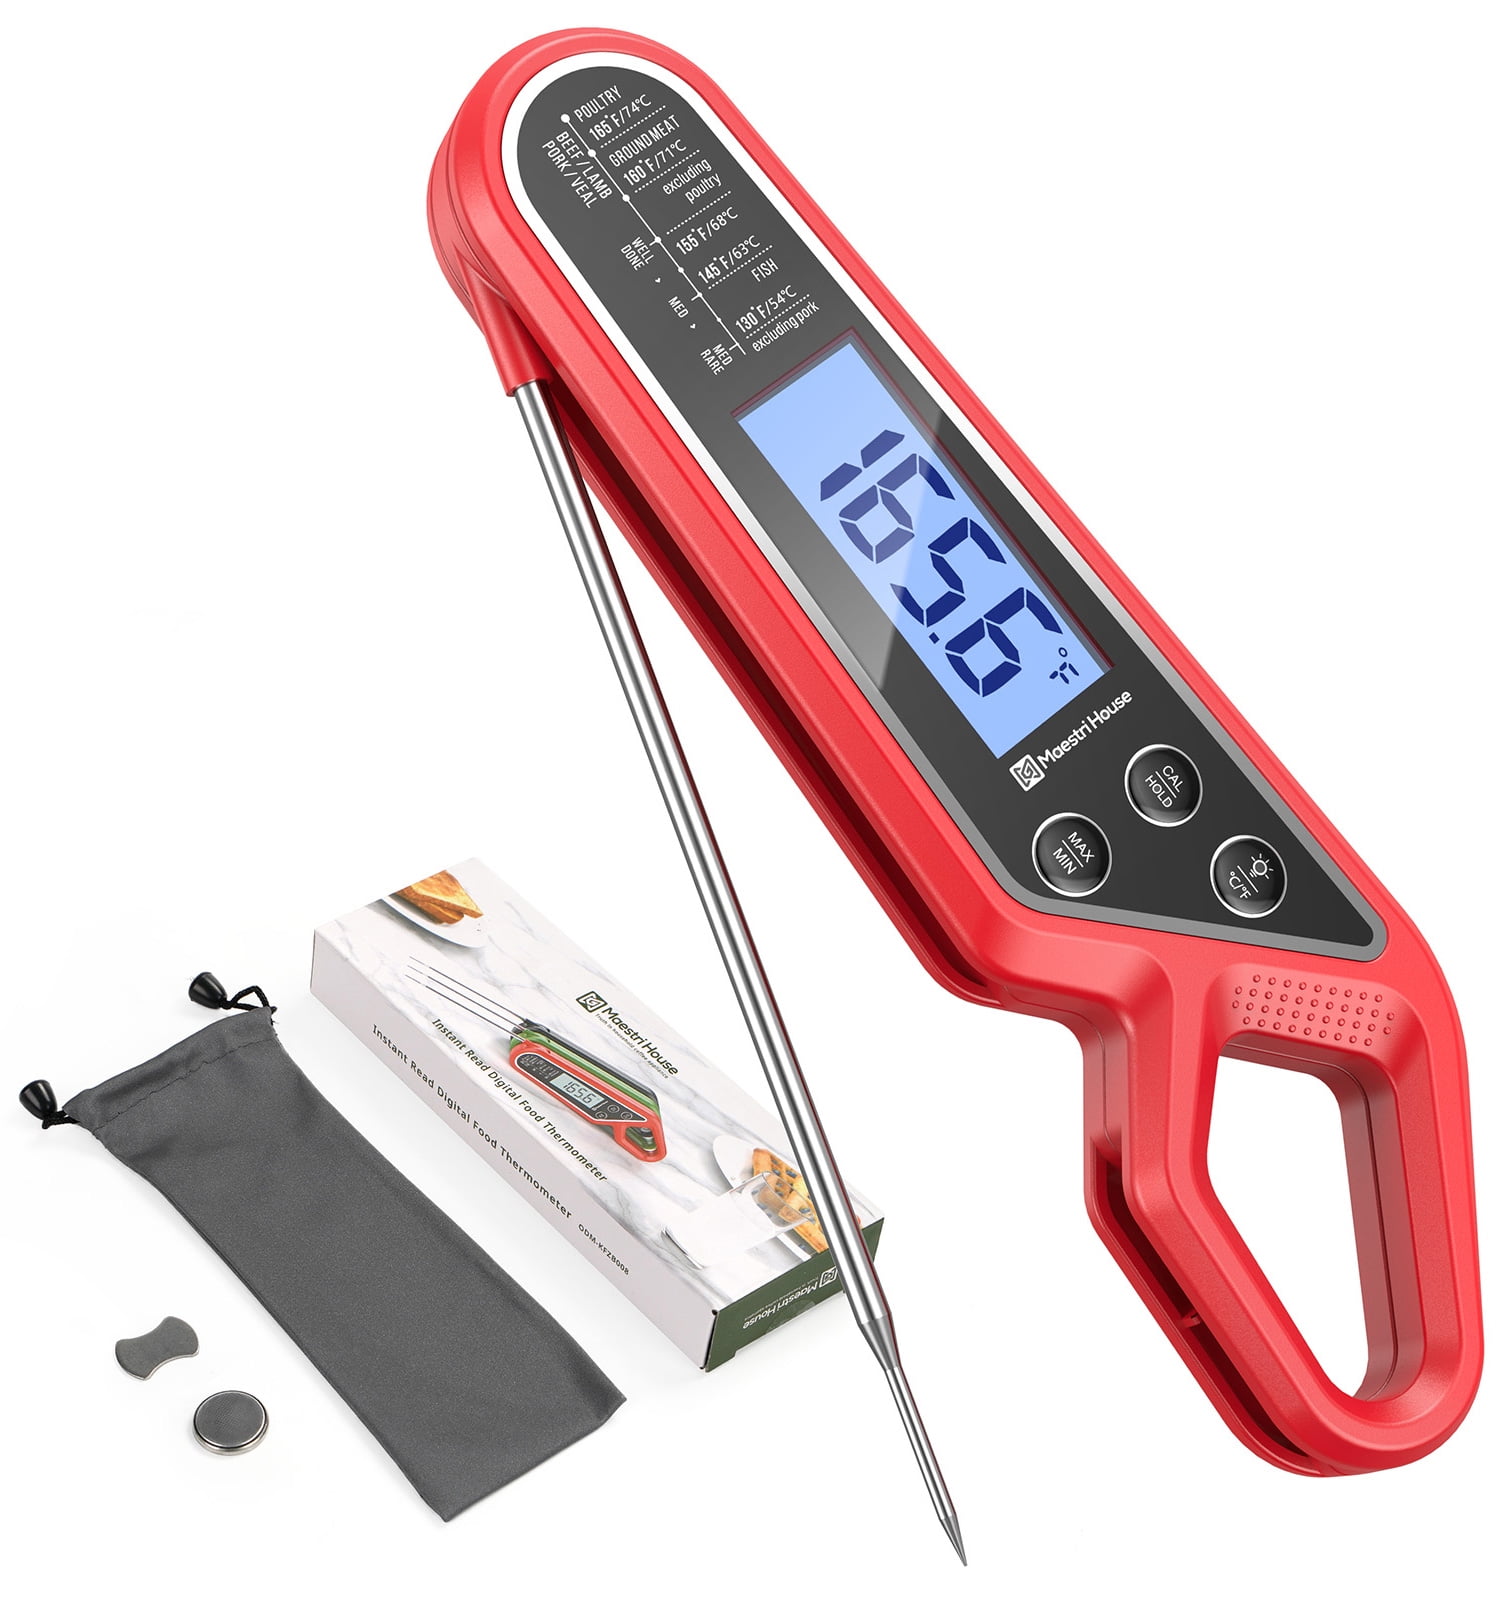 Meat Thermometer, 1 each at Whole Foods Market